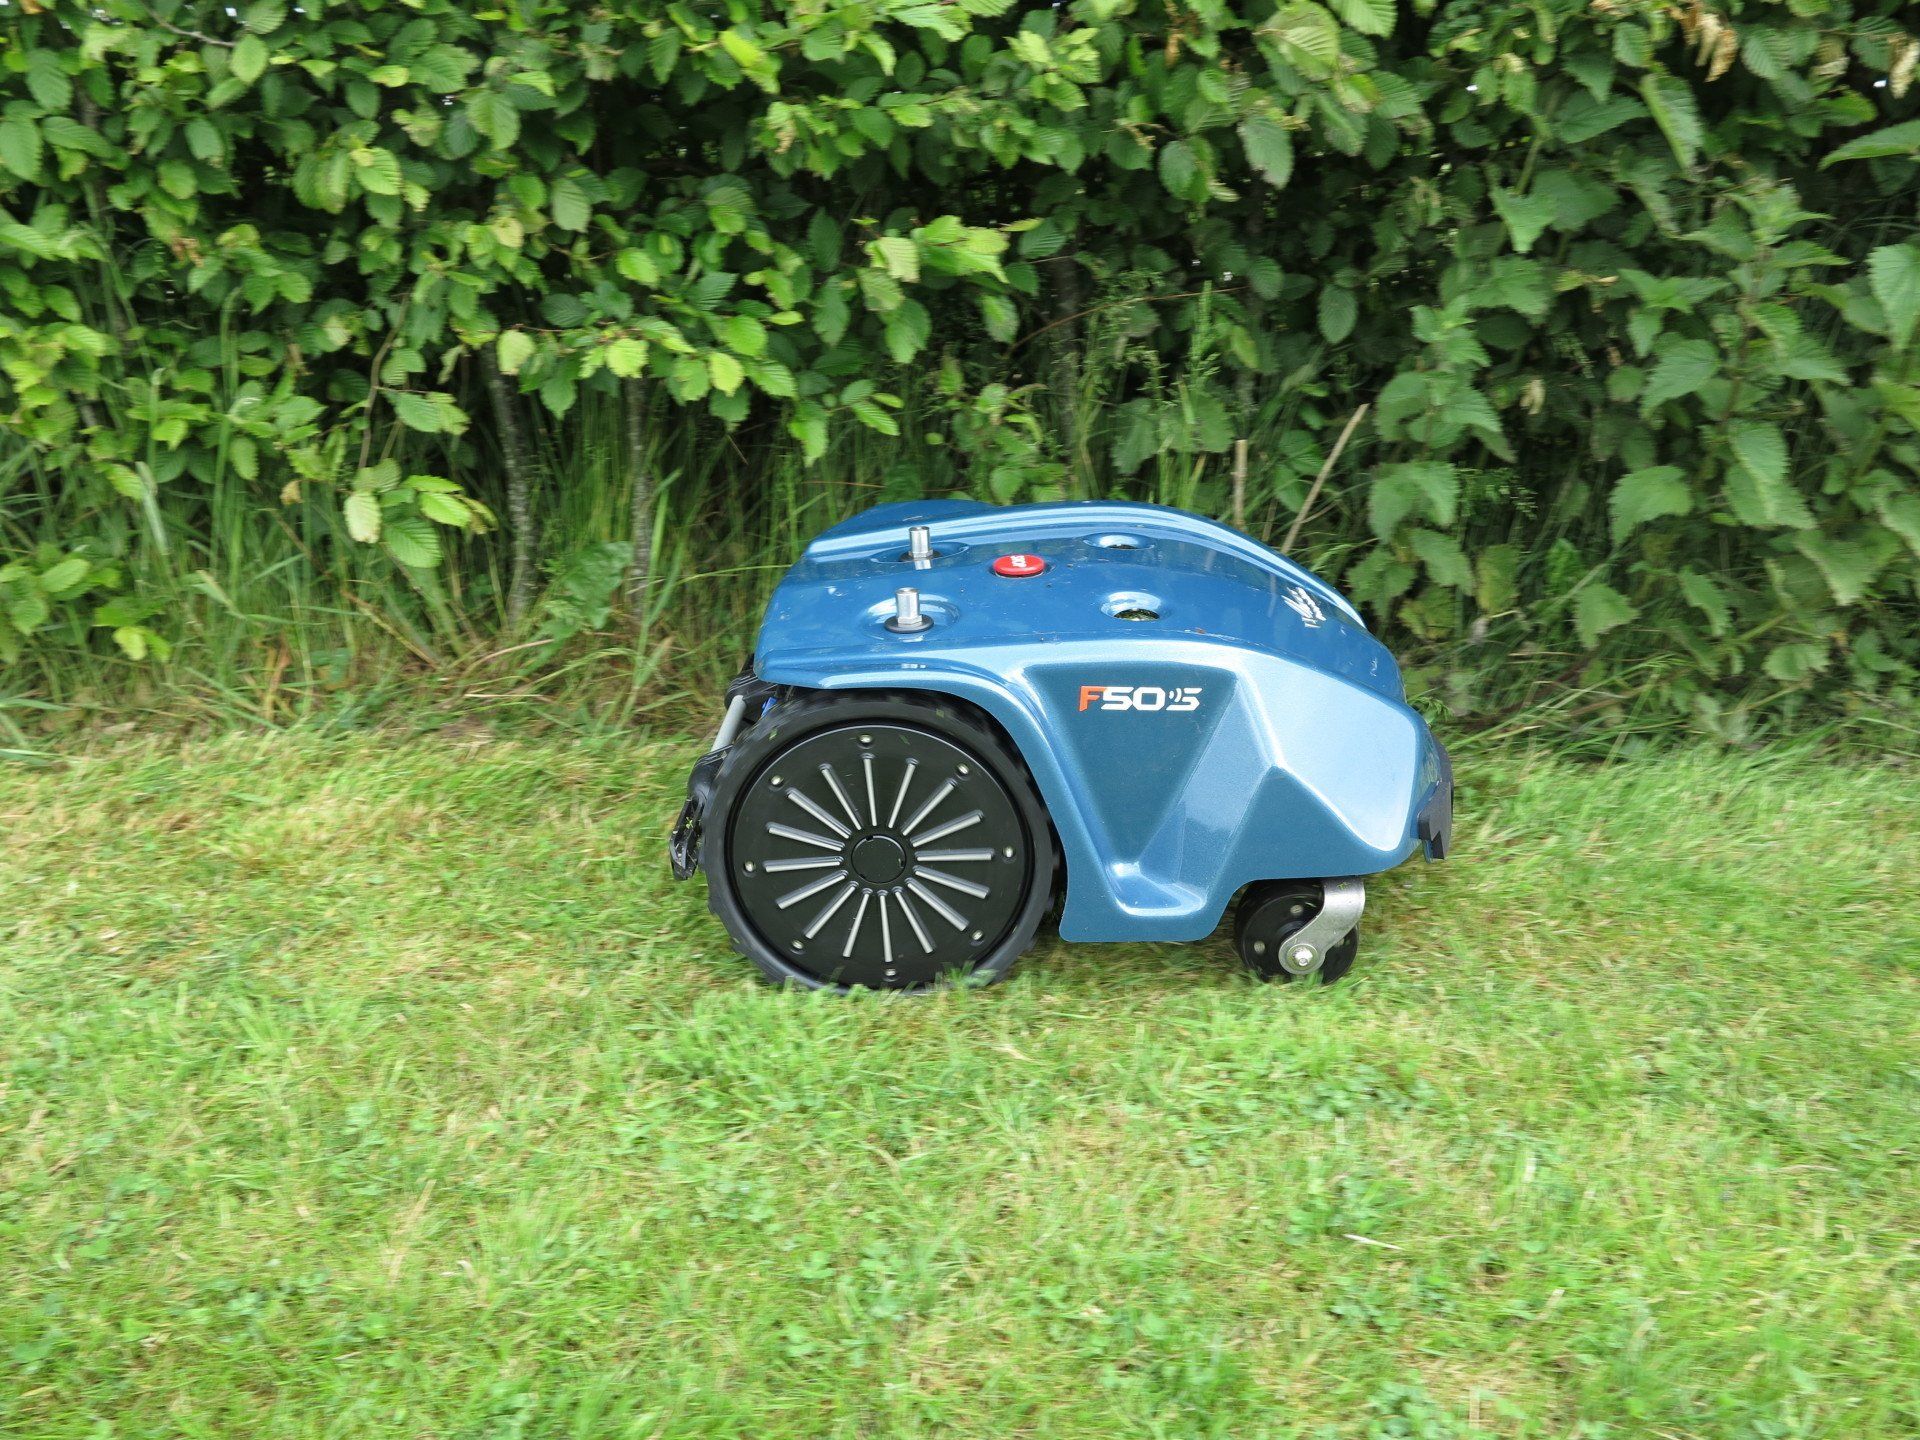 We and fit all brands or robot lawn automowers ,